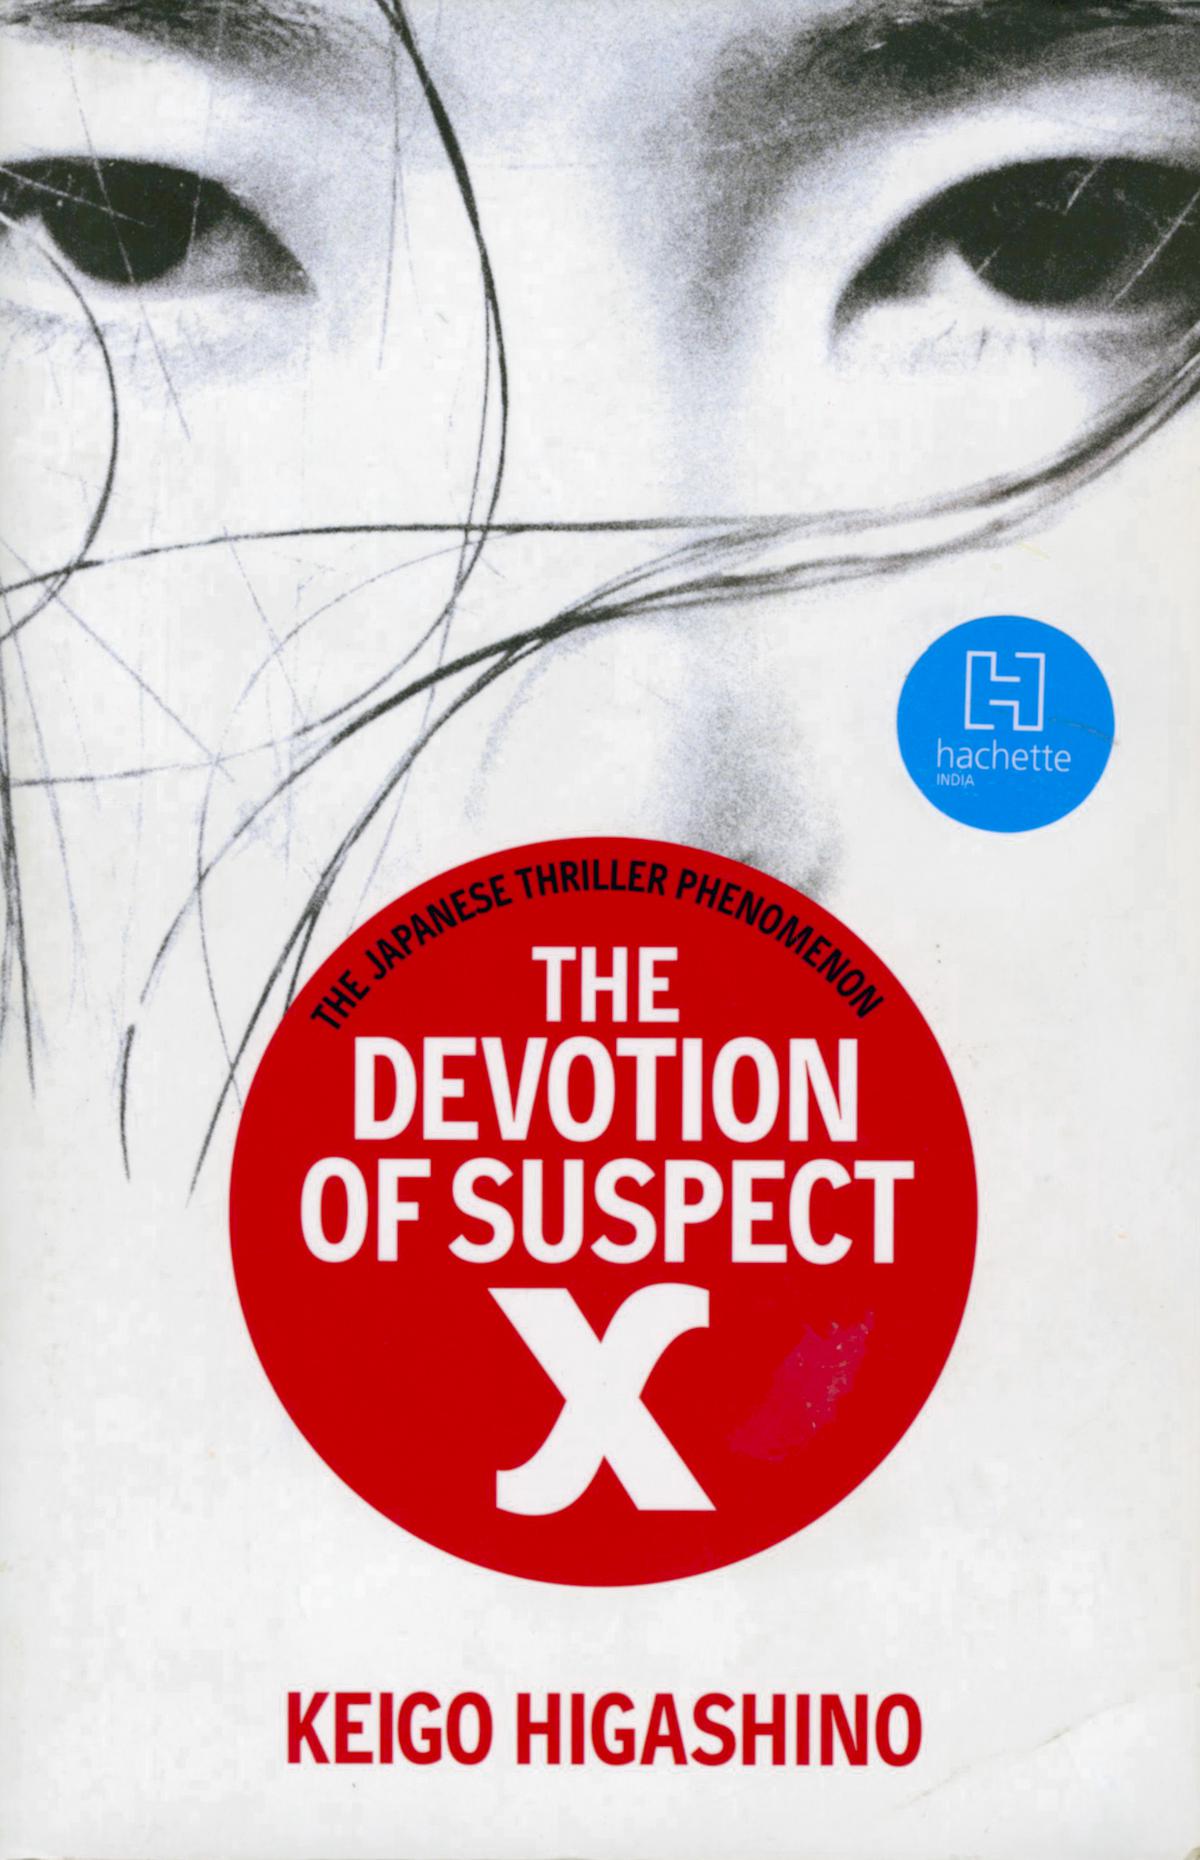 The Japanese thriller 'The Devotion of Suspect X' by Keigo Higashino is widely believed to be the inspiration for the 'Drishyam' films.